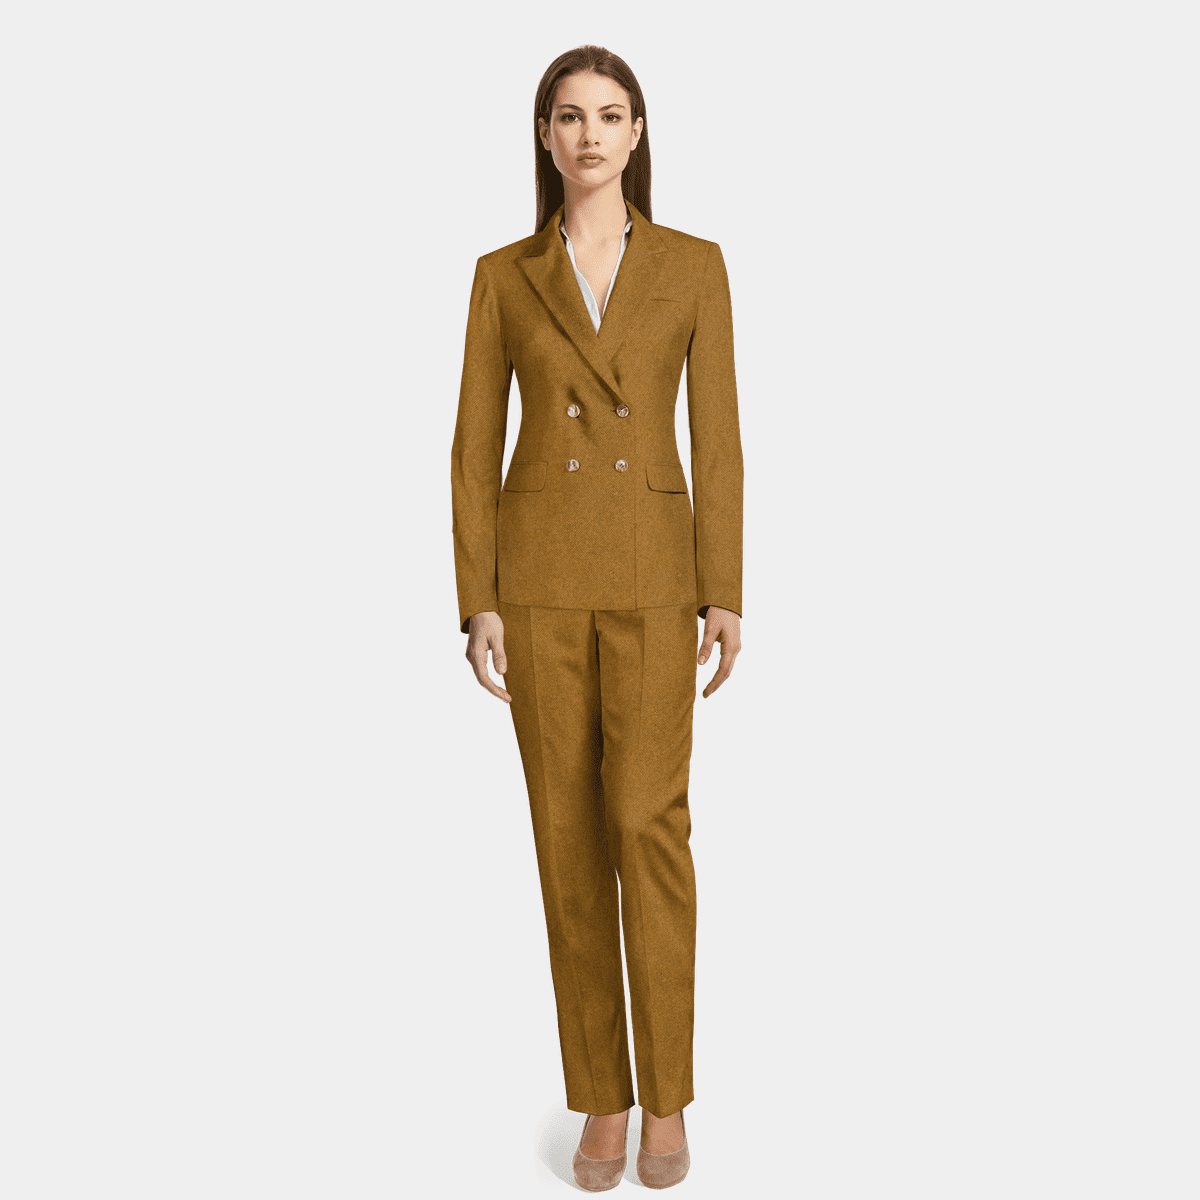 Premium Charcoal Grey double breasted wool Pant Suit